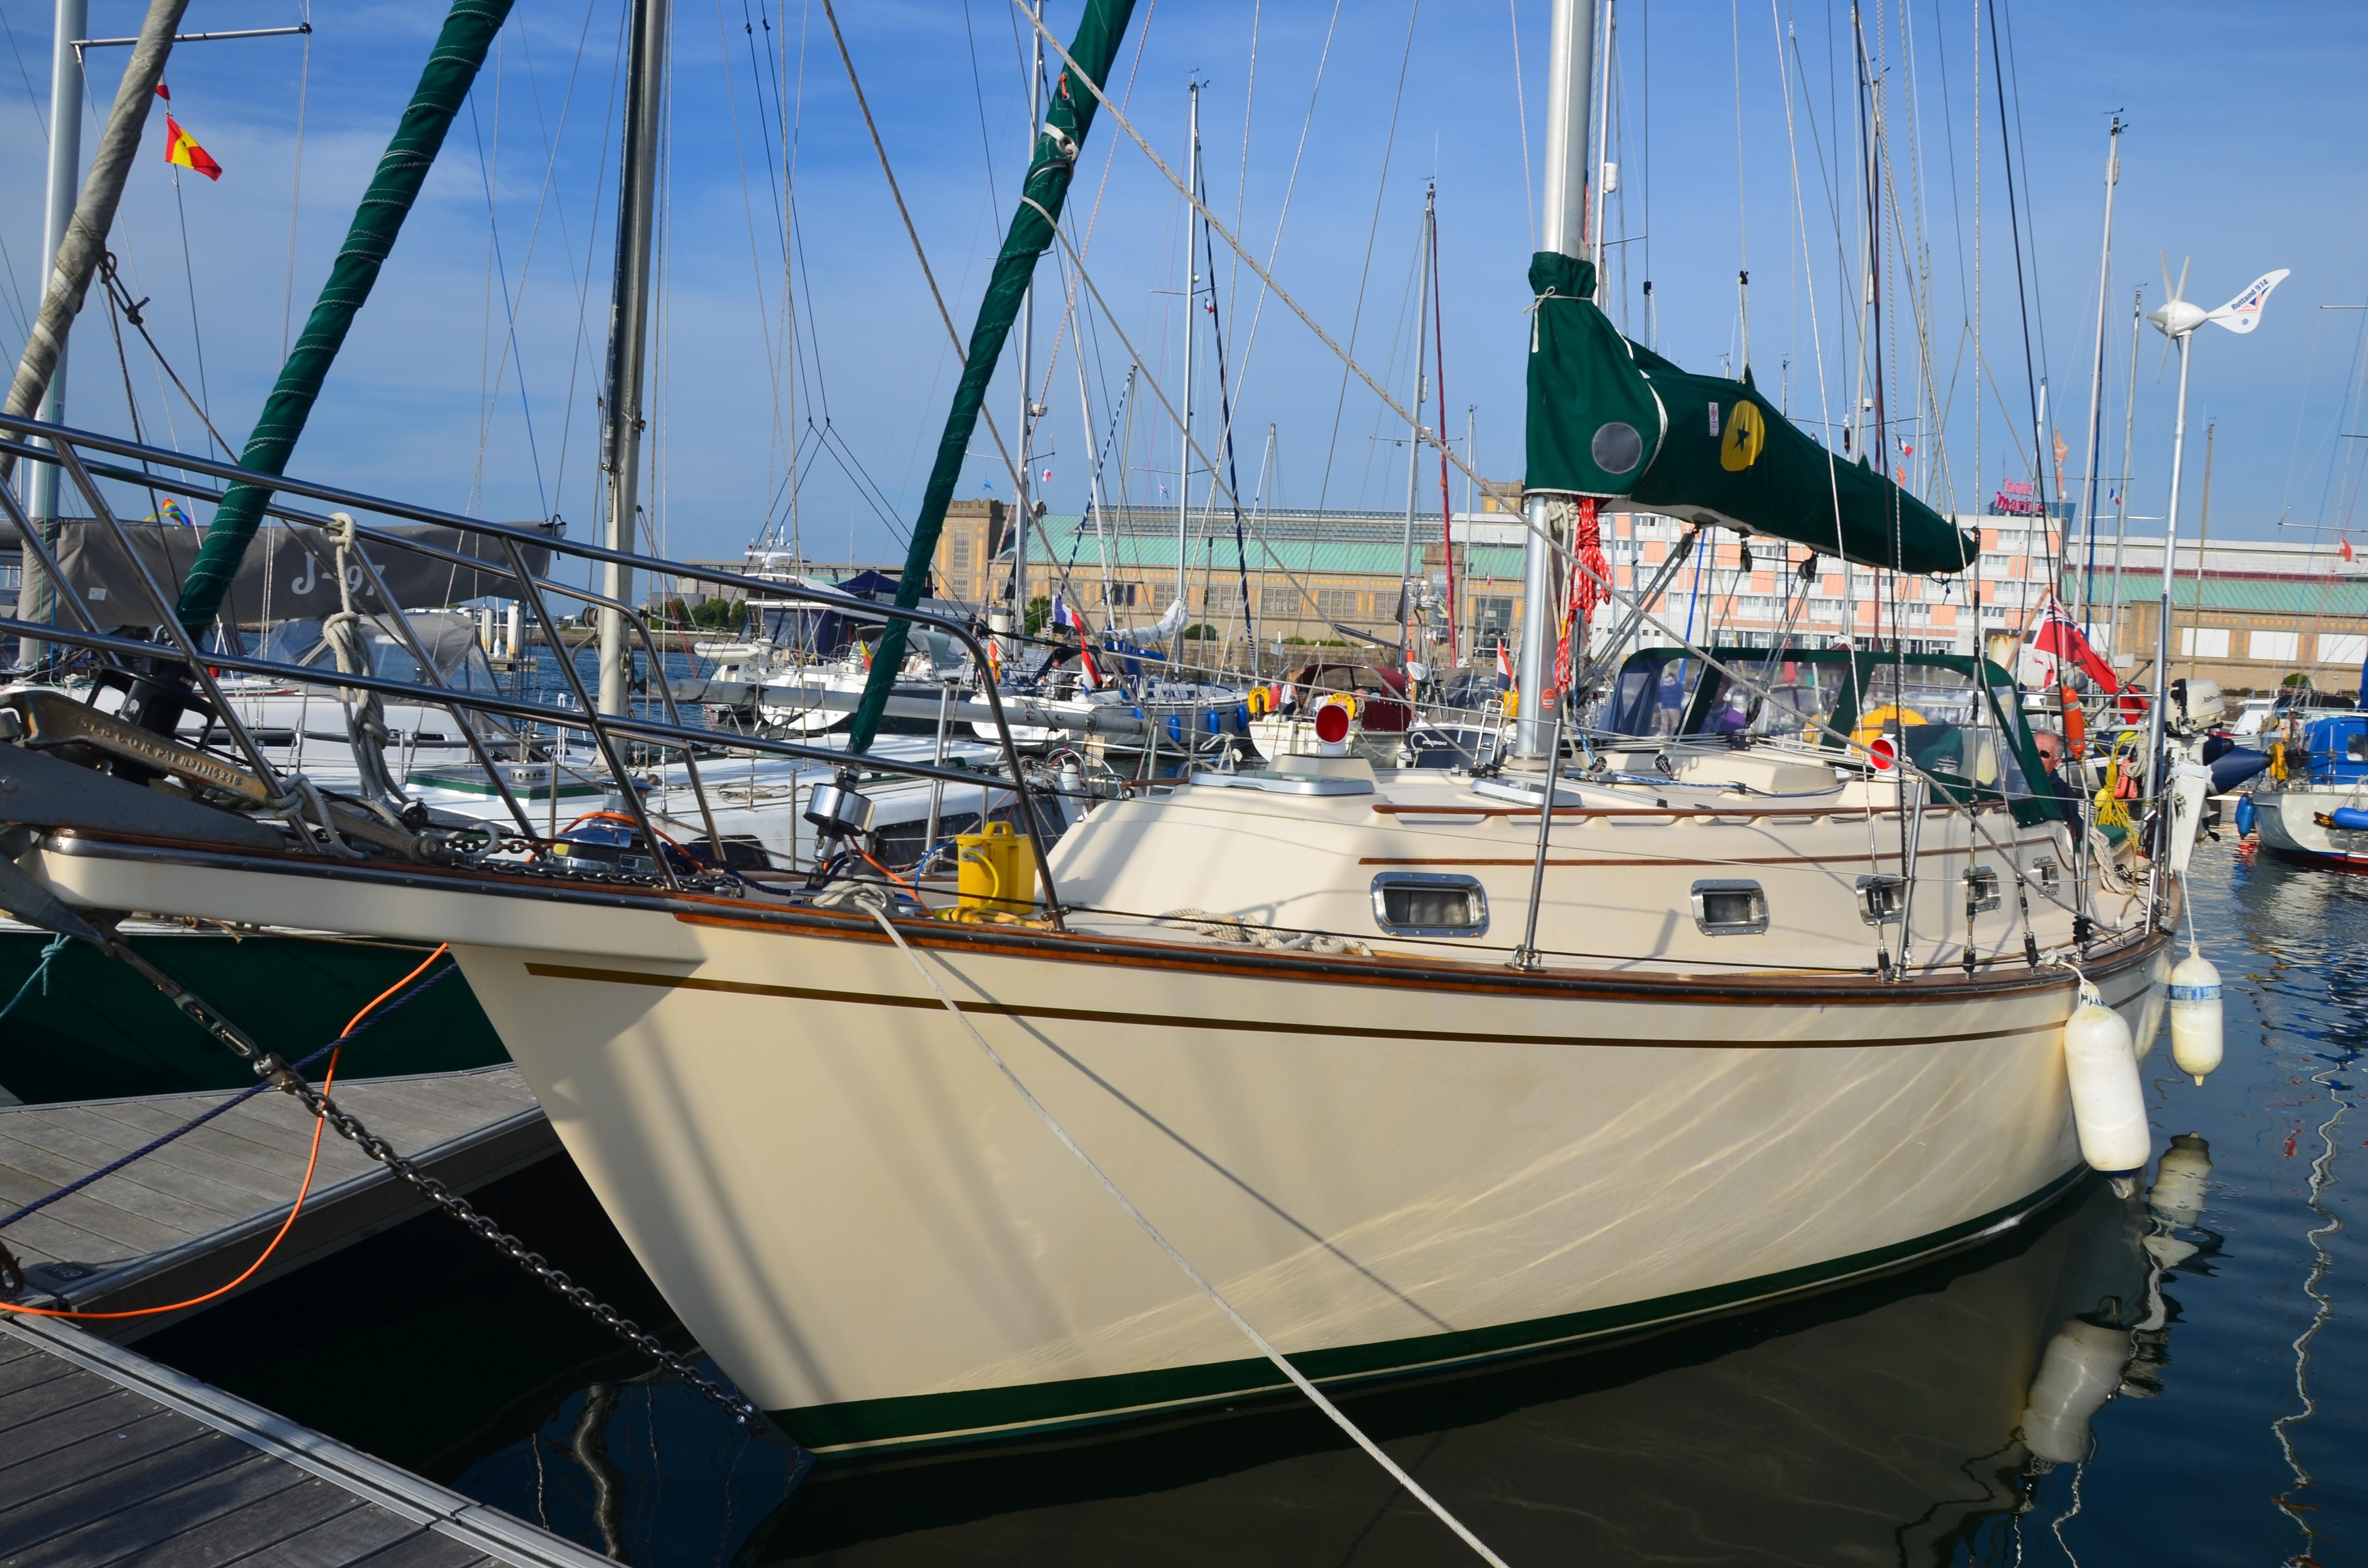 35 foot island packet sailboat for sale